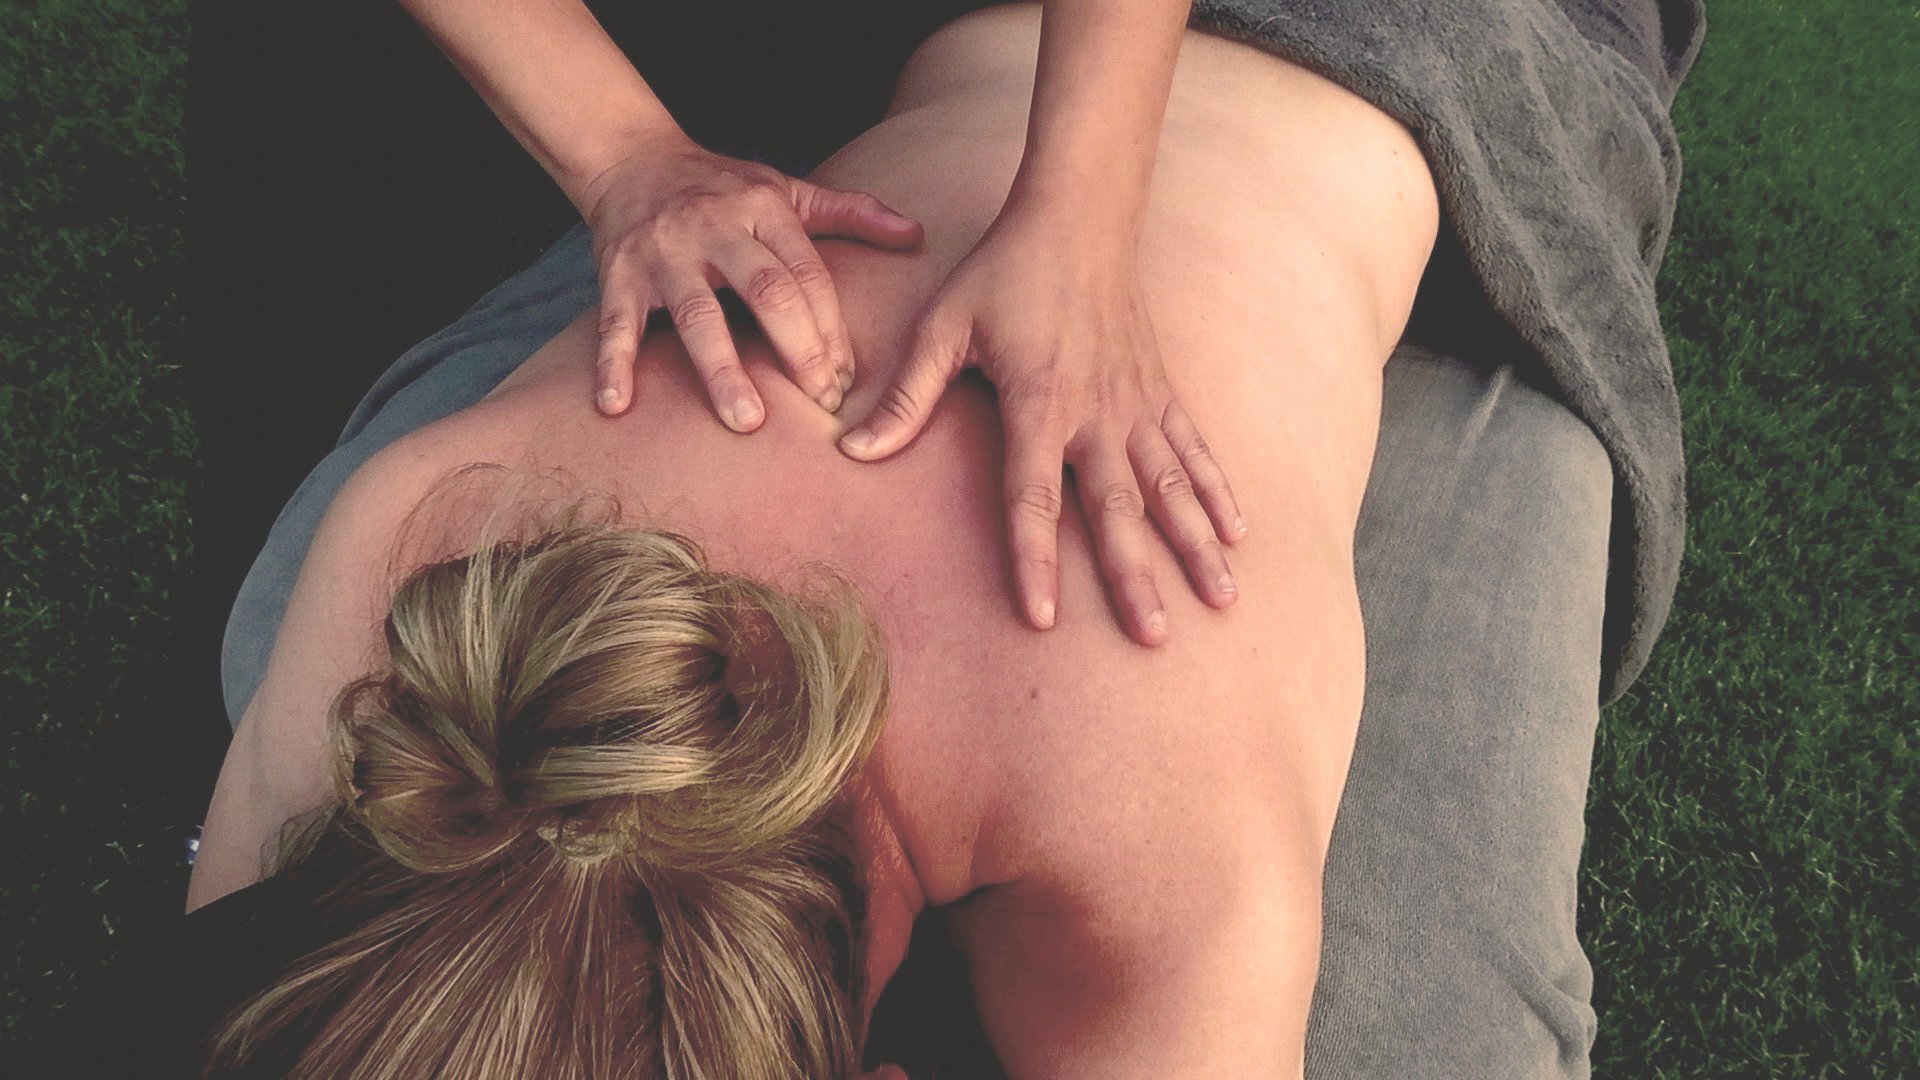 Deep Tissue Massage for Shoulder Pain Relief - One Body LDN